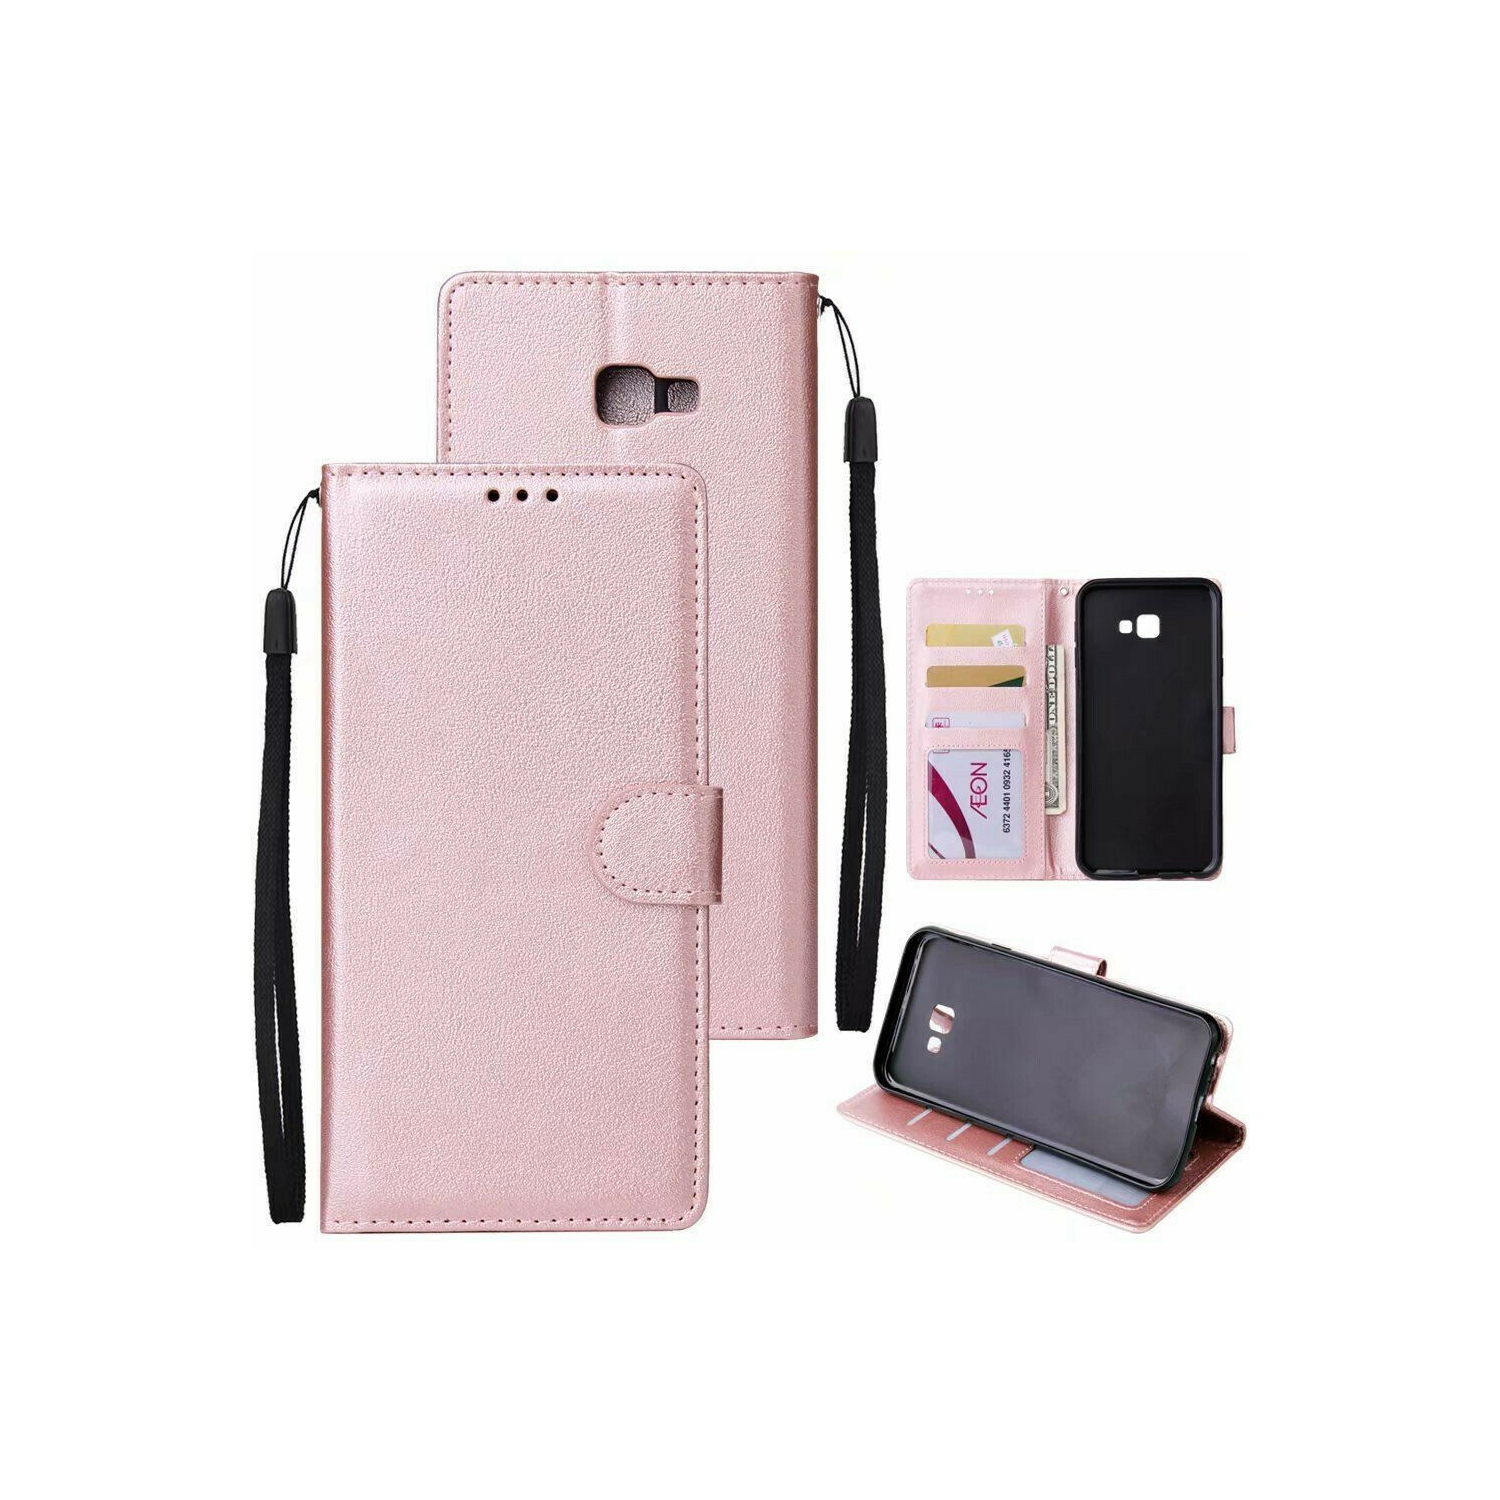 【CSmart】 Magnetic Card Slot Leather Folio Wallet Flip Case Cover for Samsung Galaxy J3 Prime / Galaxy J3 2017, Rose Gold